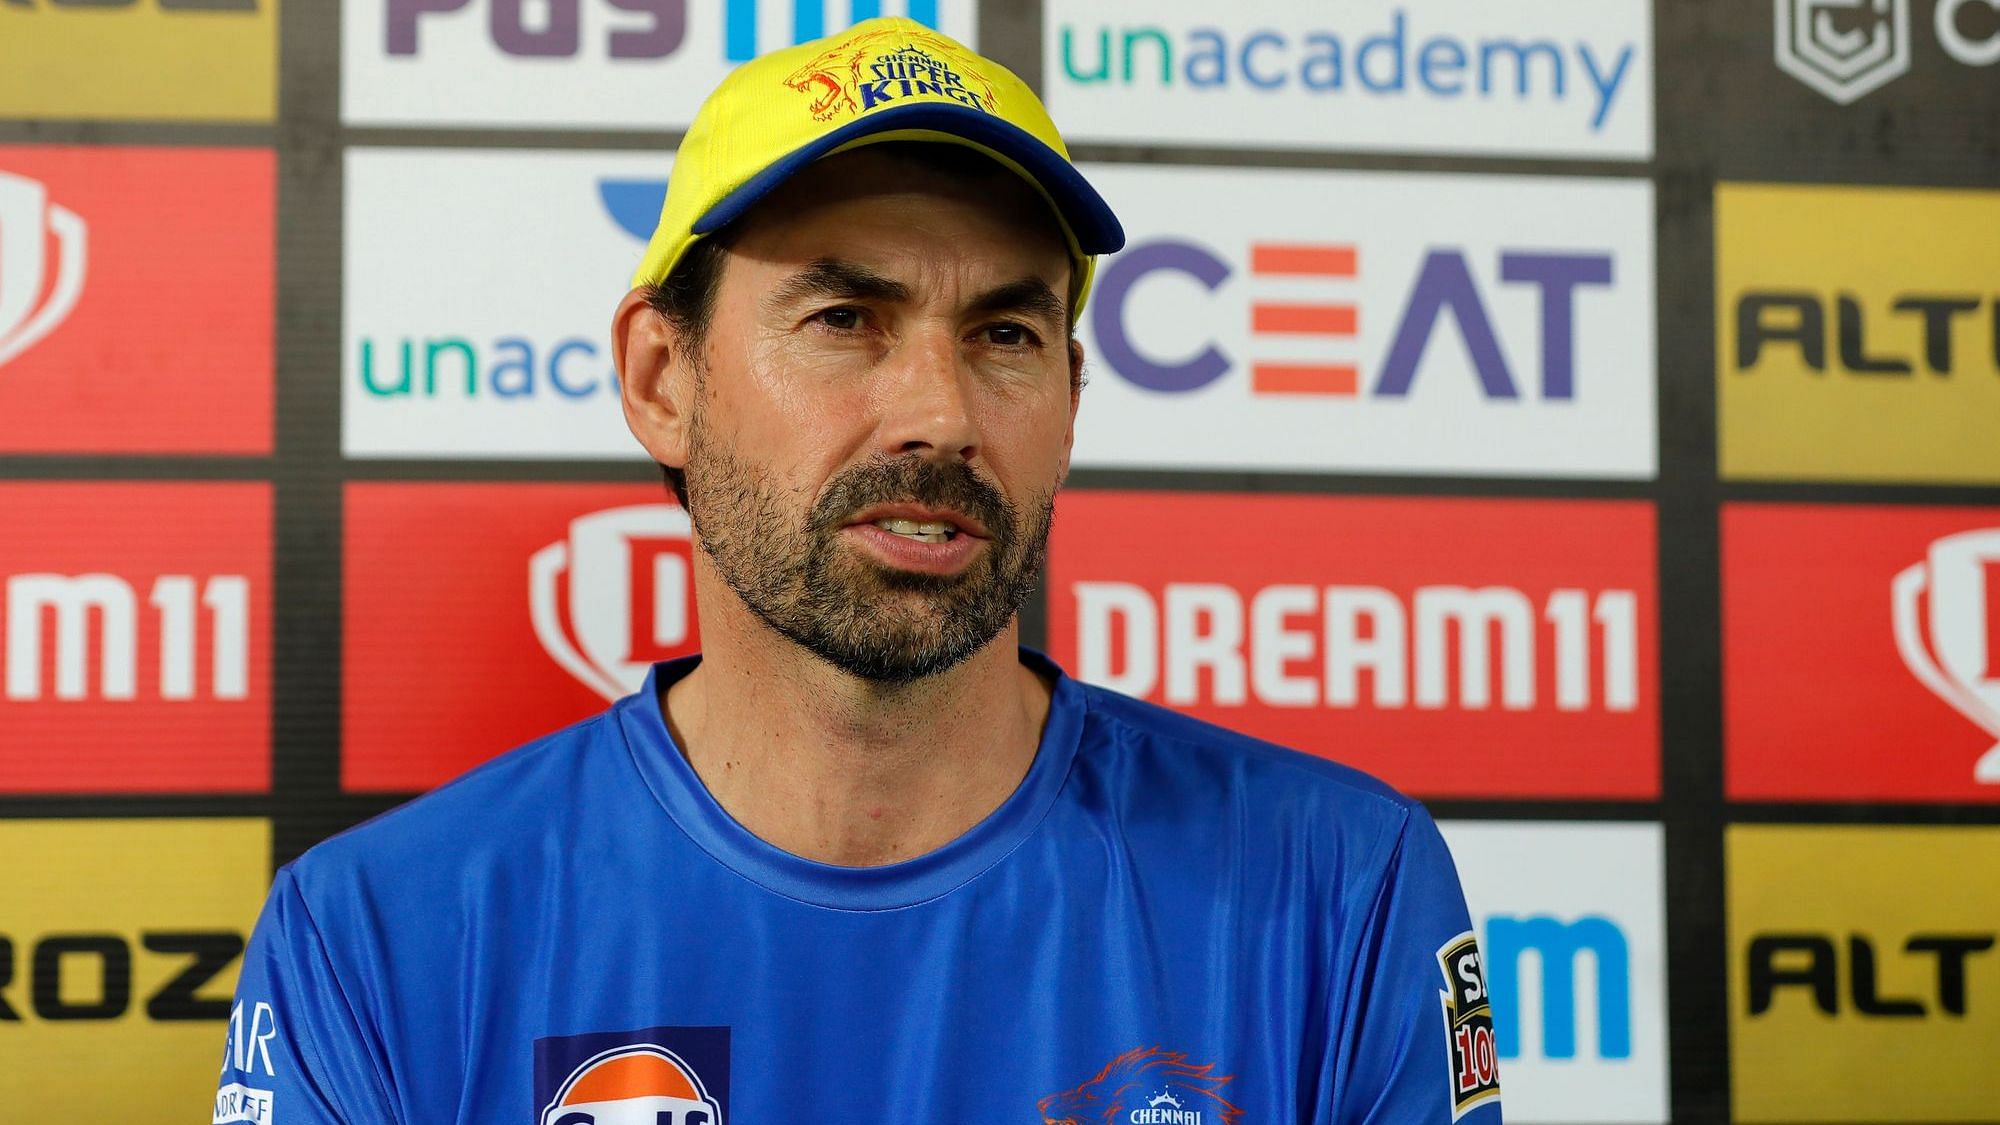 Chennai Super Kings coach Stephen Fleming said that with less contribution from batters at the top, they have to find a better combination